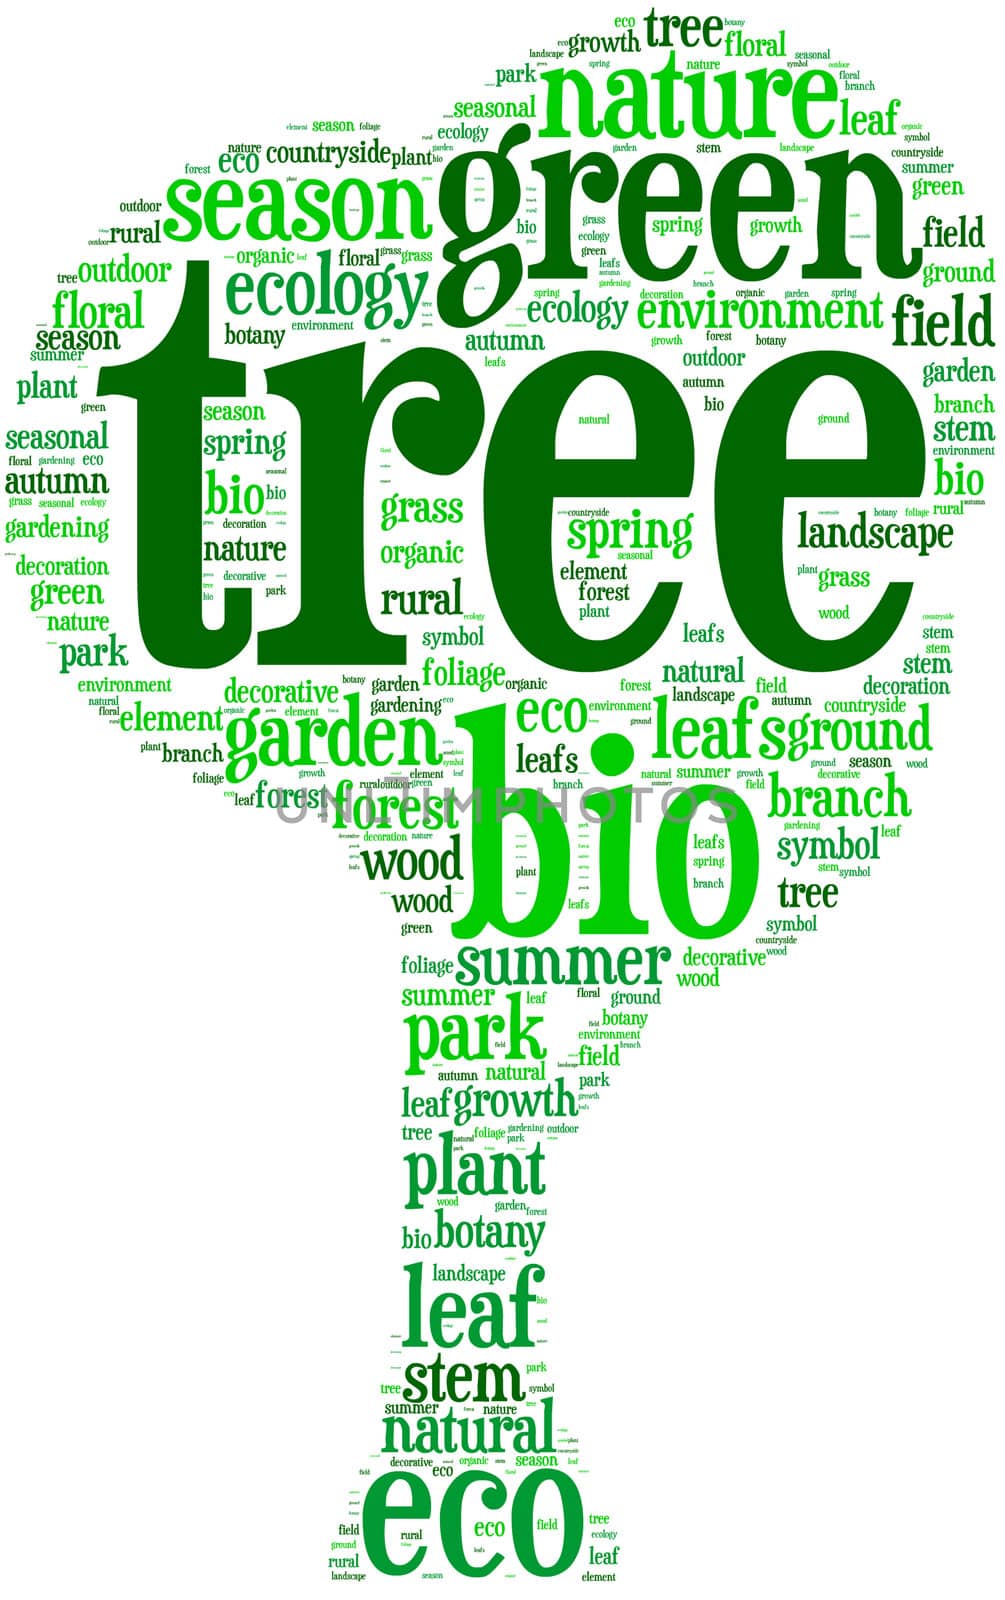 Tree shaped tag cloud - nature concept illustration